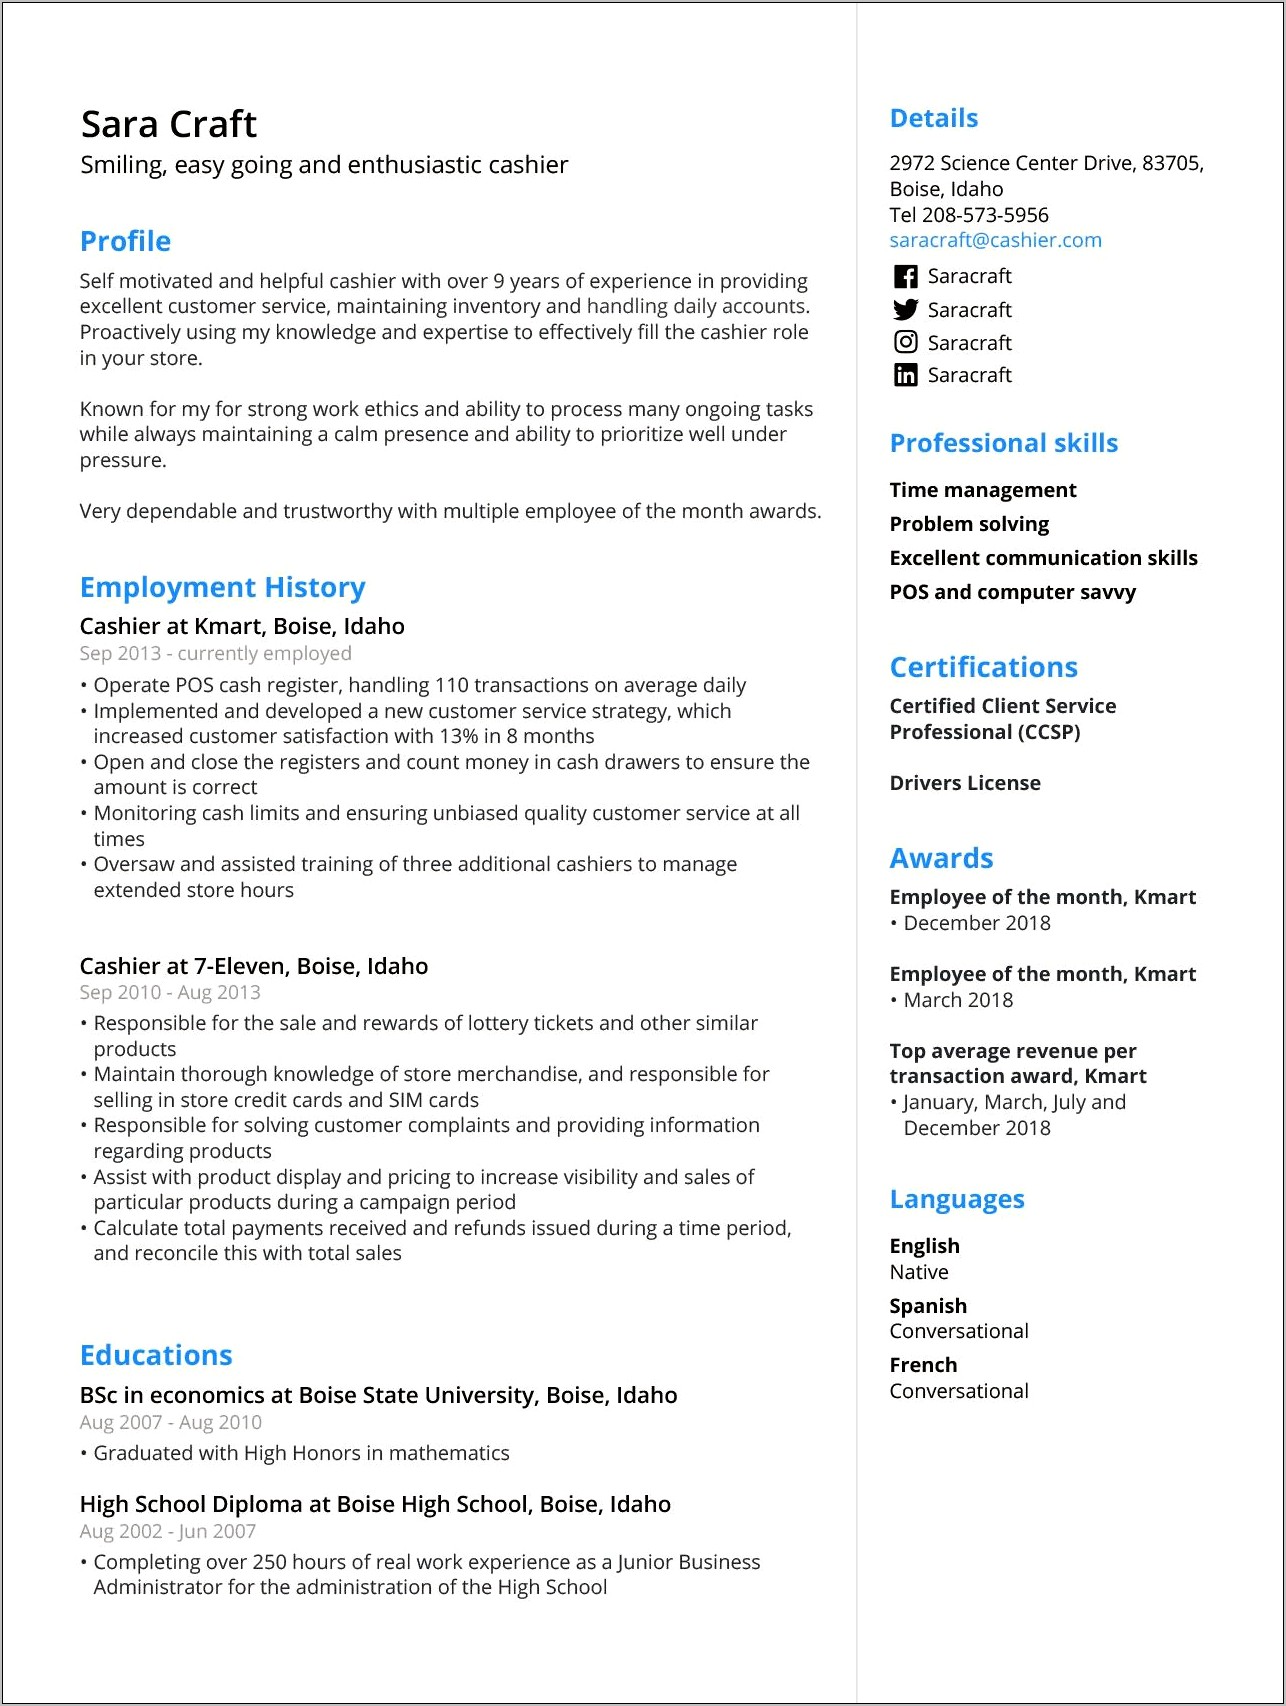 Employment Details In Resume Sample